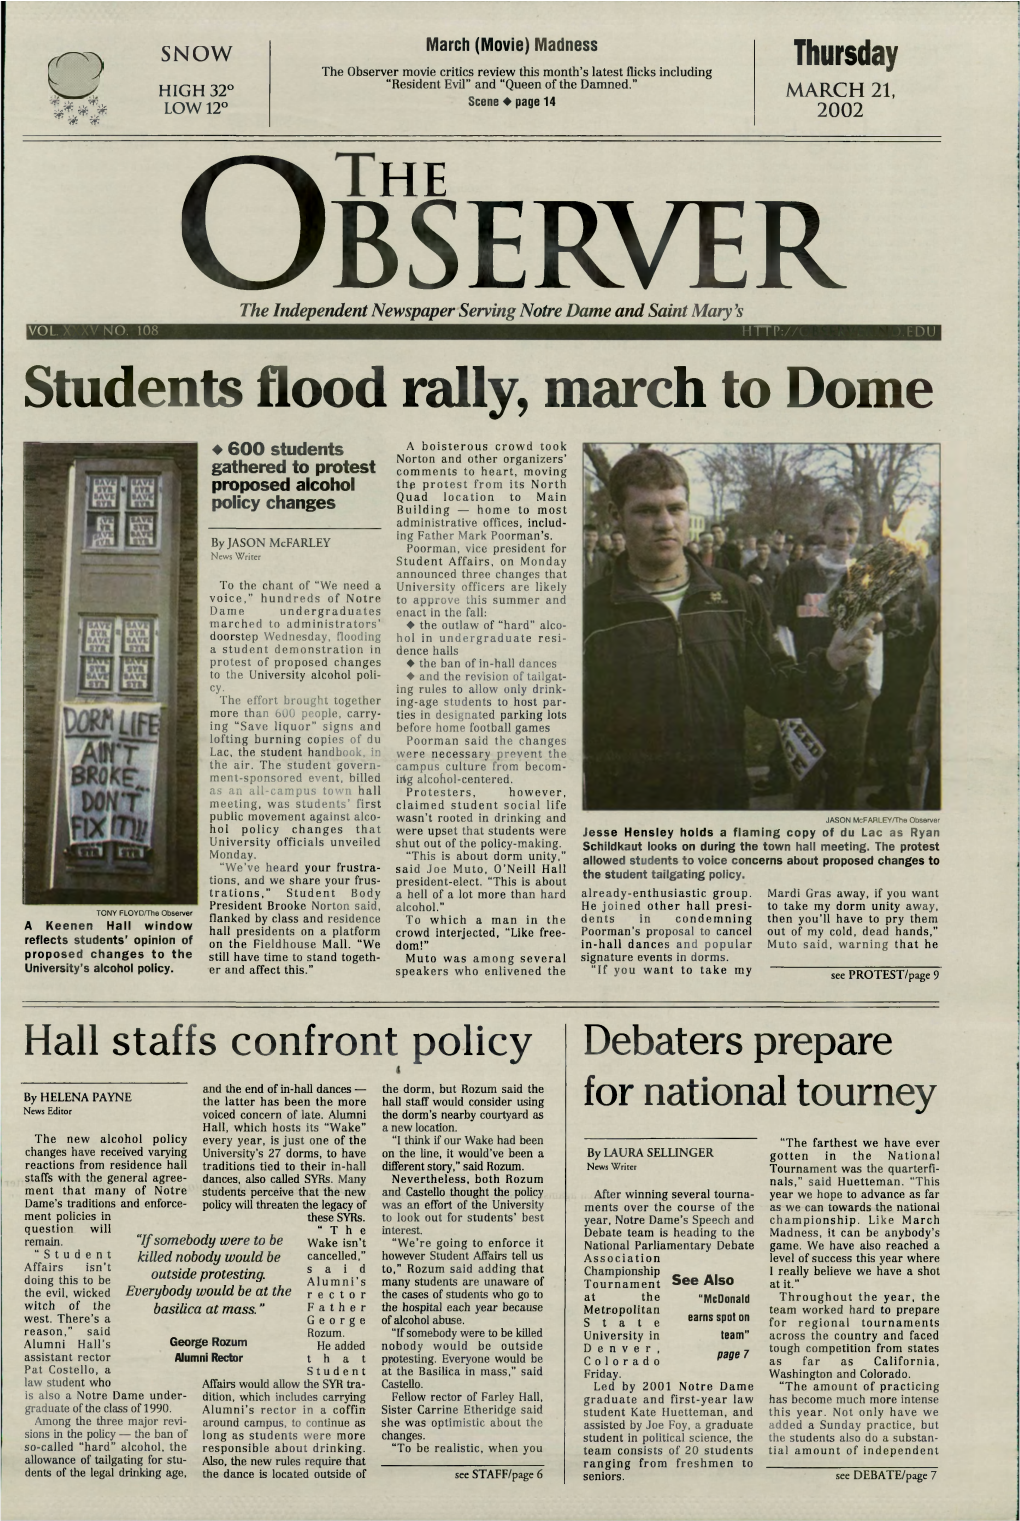 Students Flood Rally, March to Dome